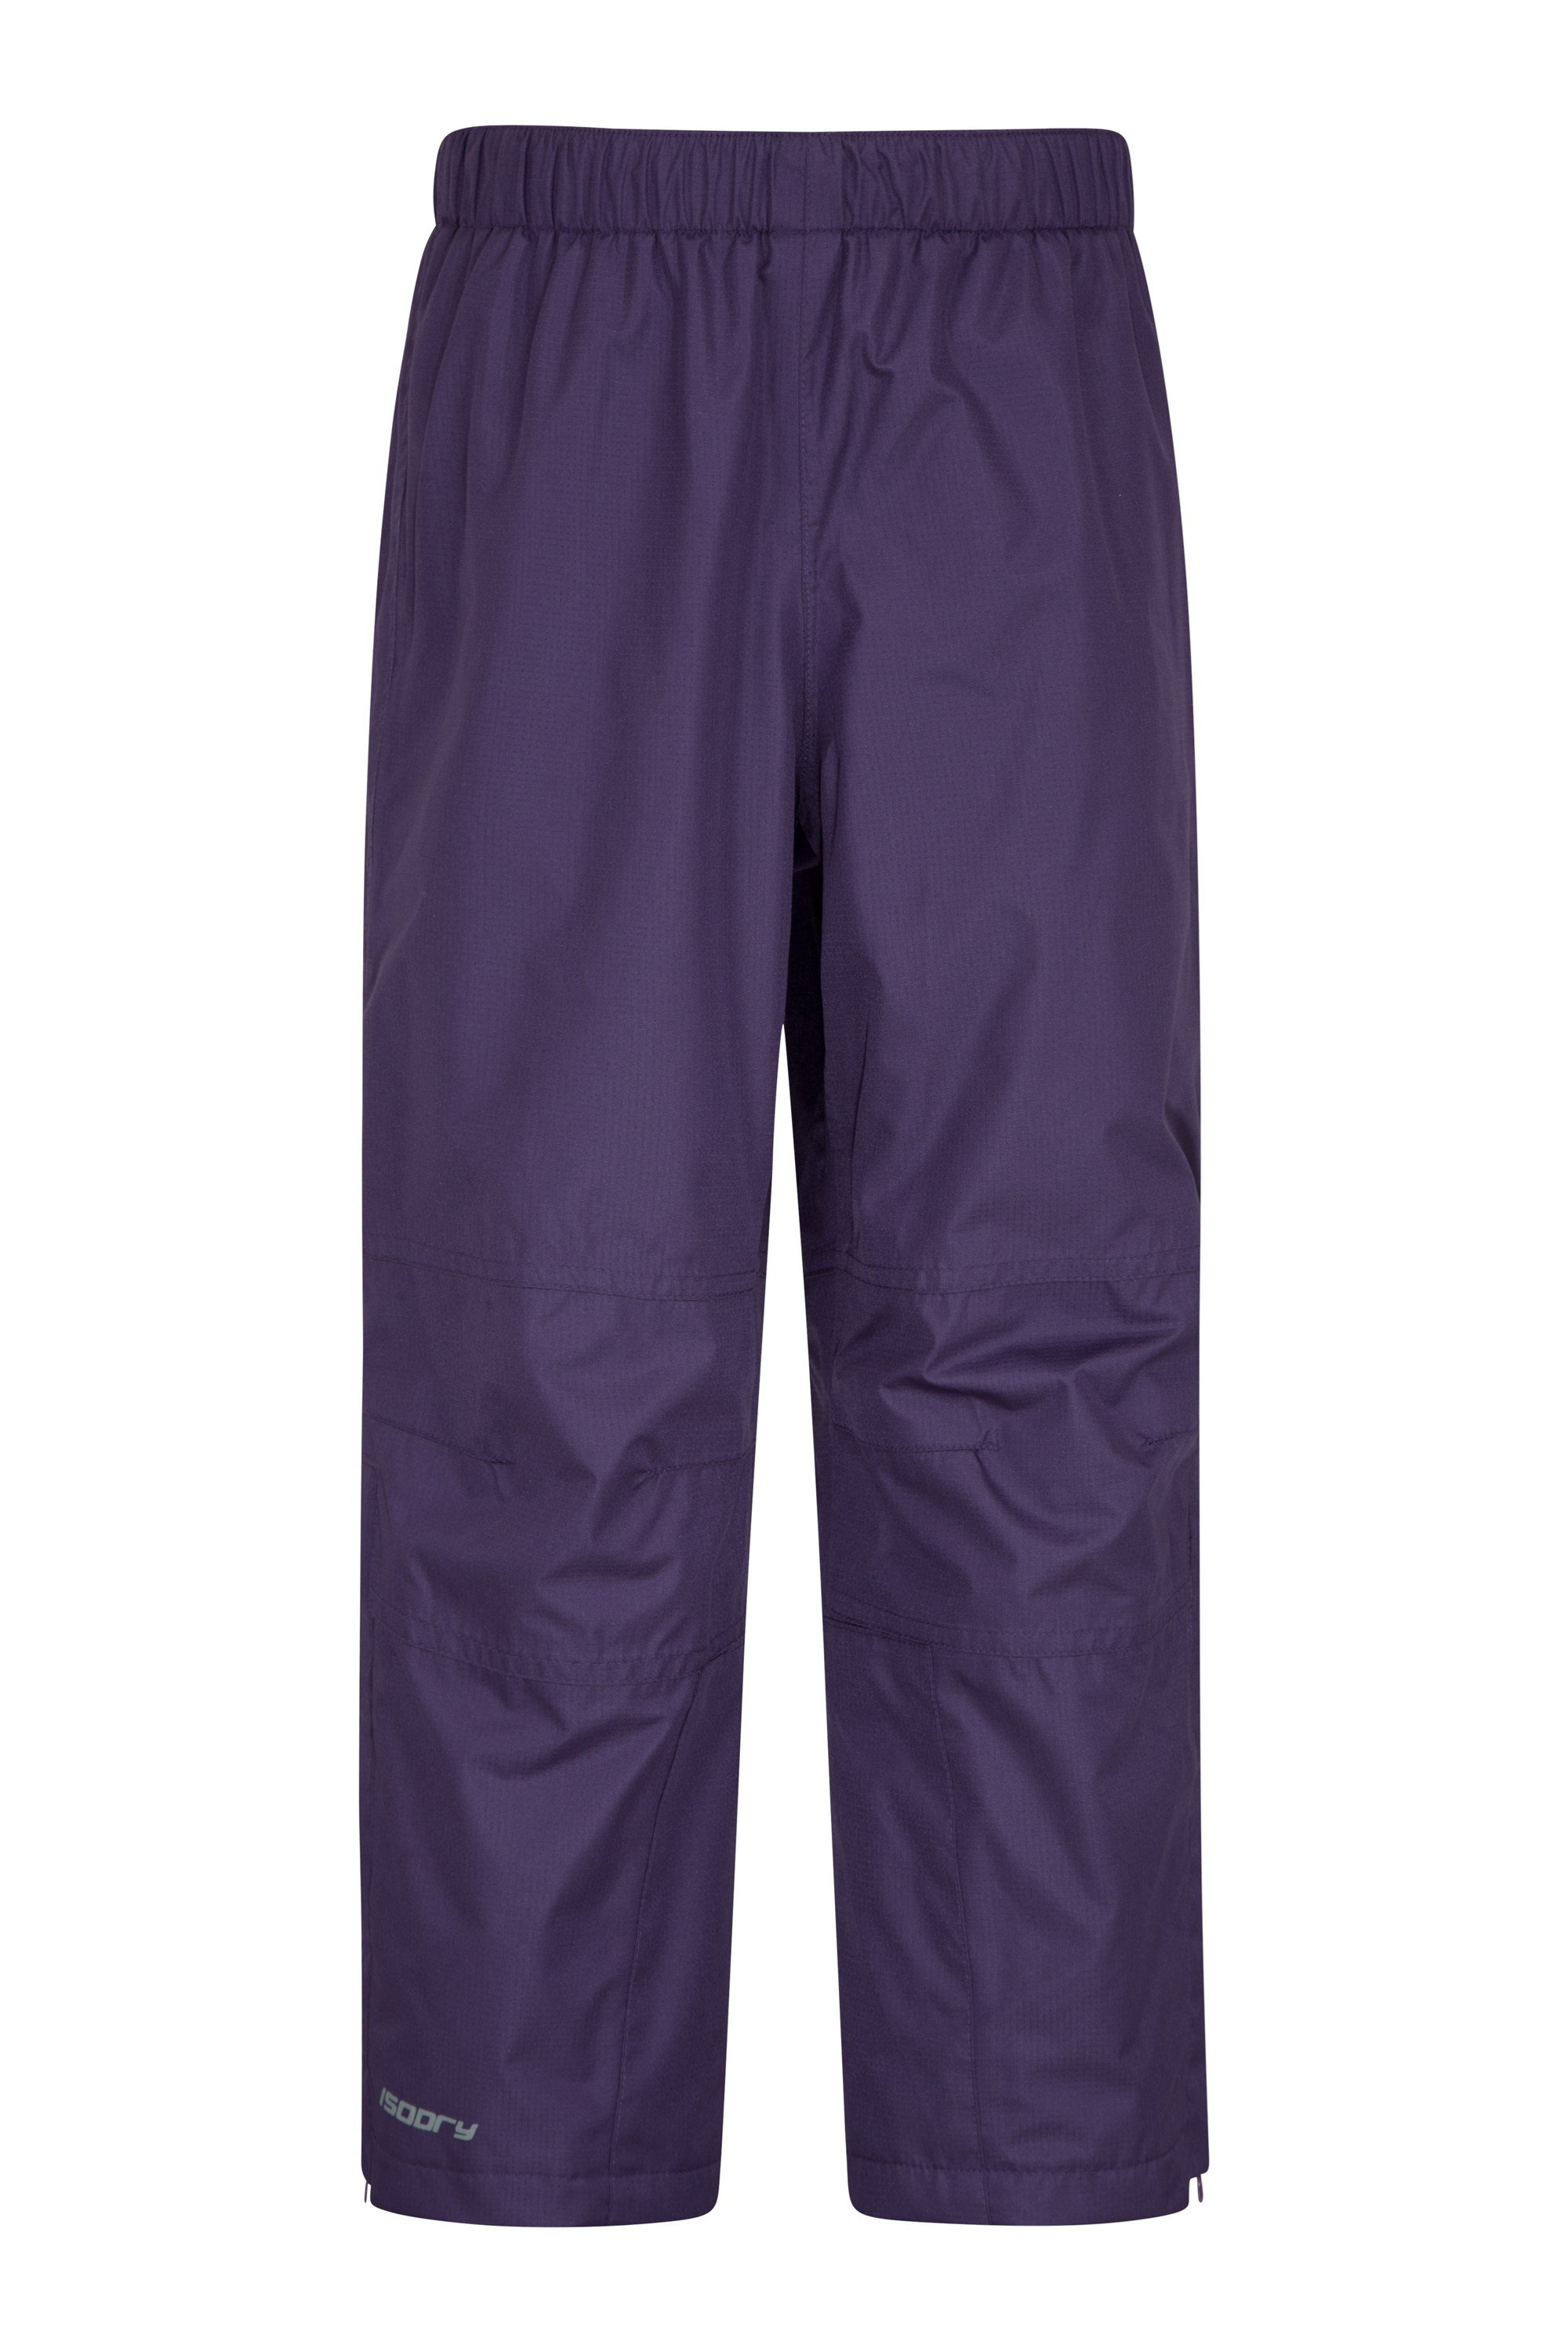 Men's Waterproof Hiking Over Trousers - NH500 Imper QUECHUA | Decathlon